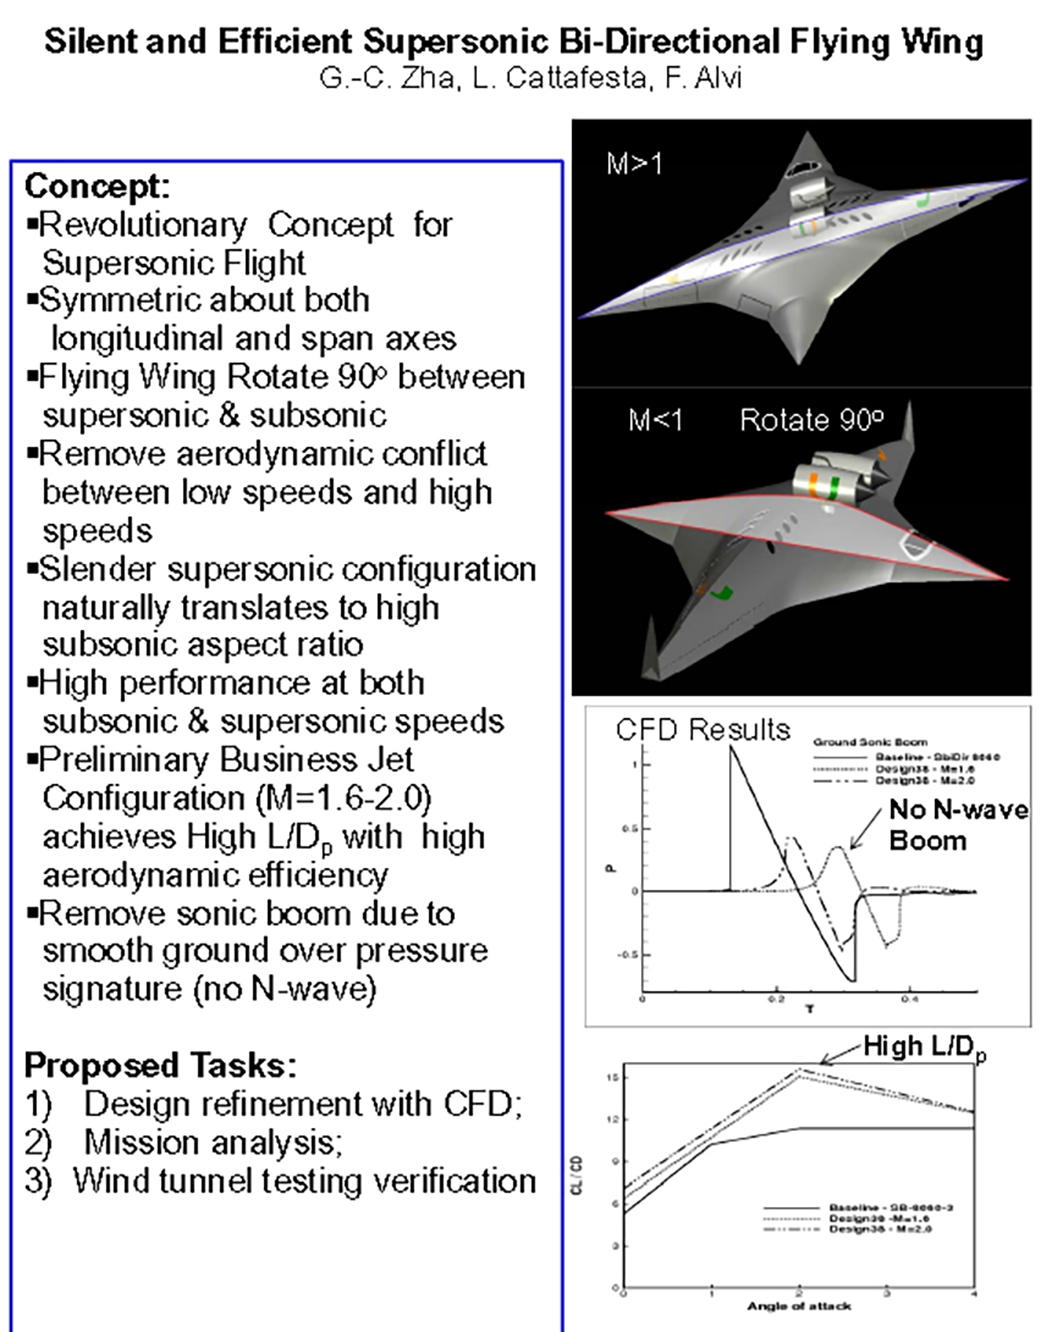 Concepts and Proposed Tasks with CFD Results.